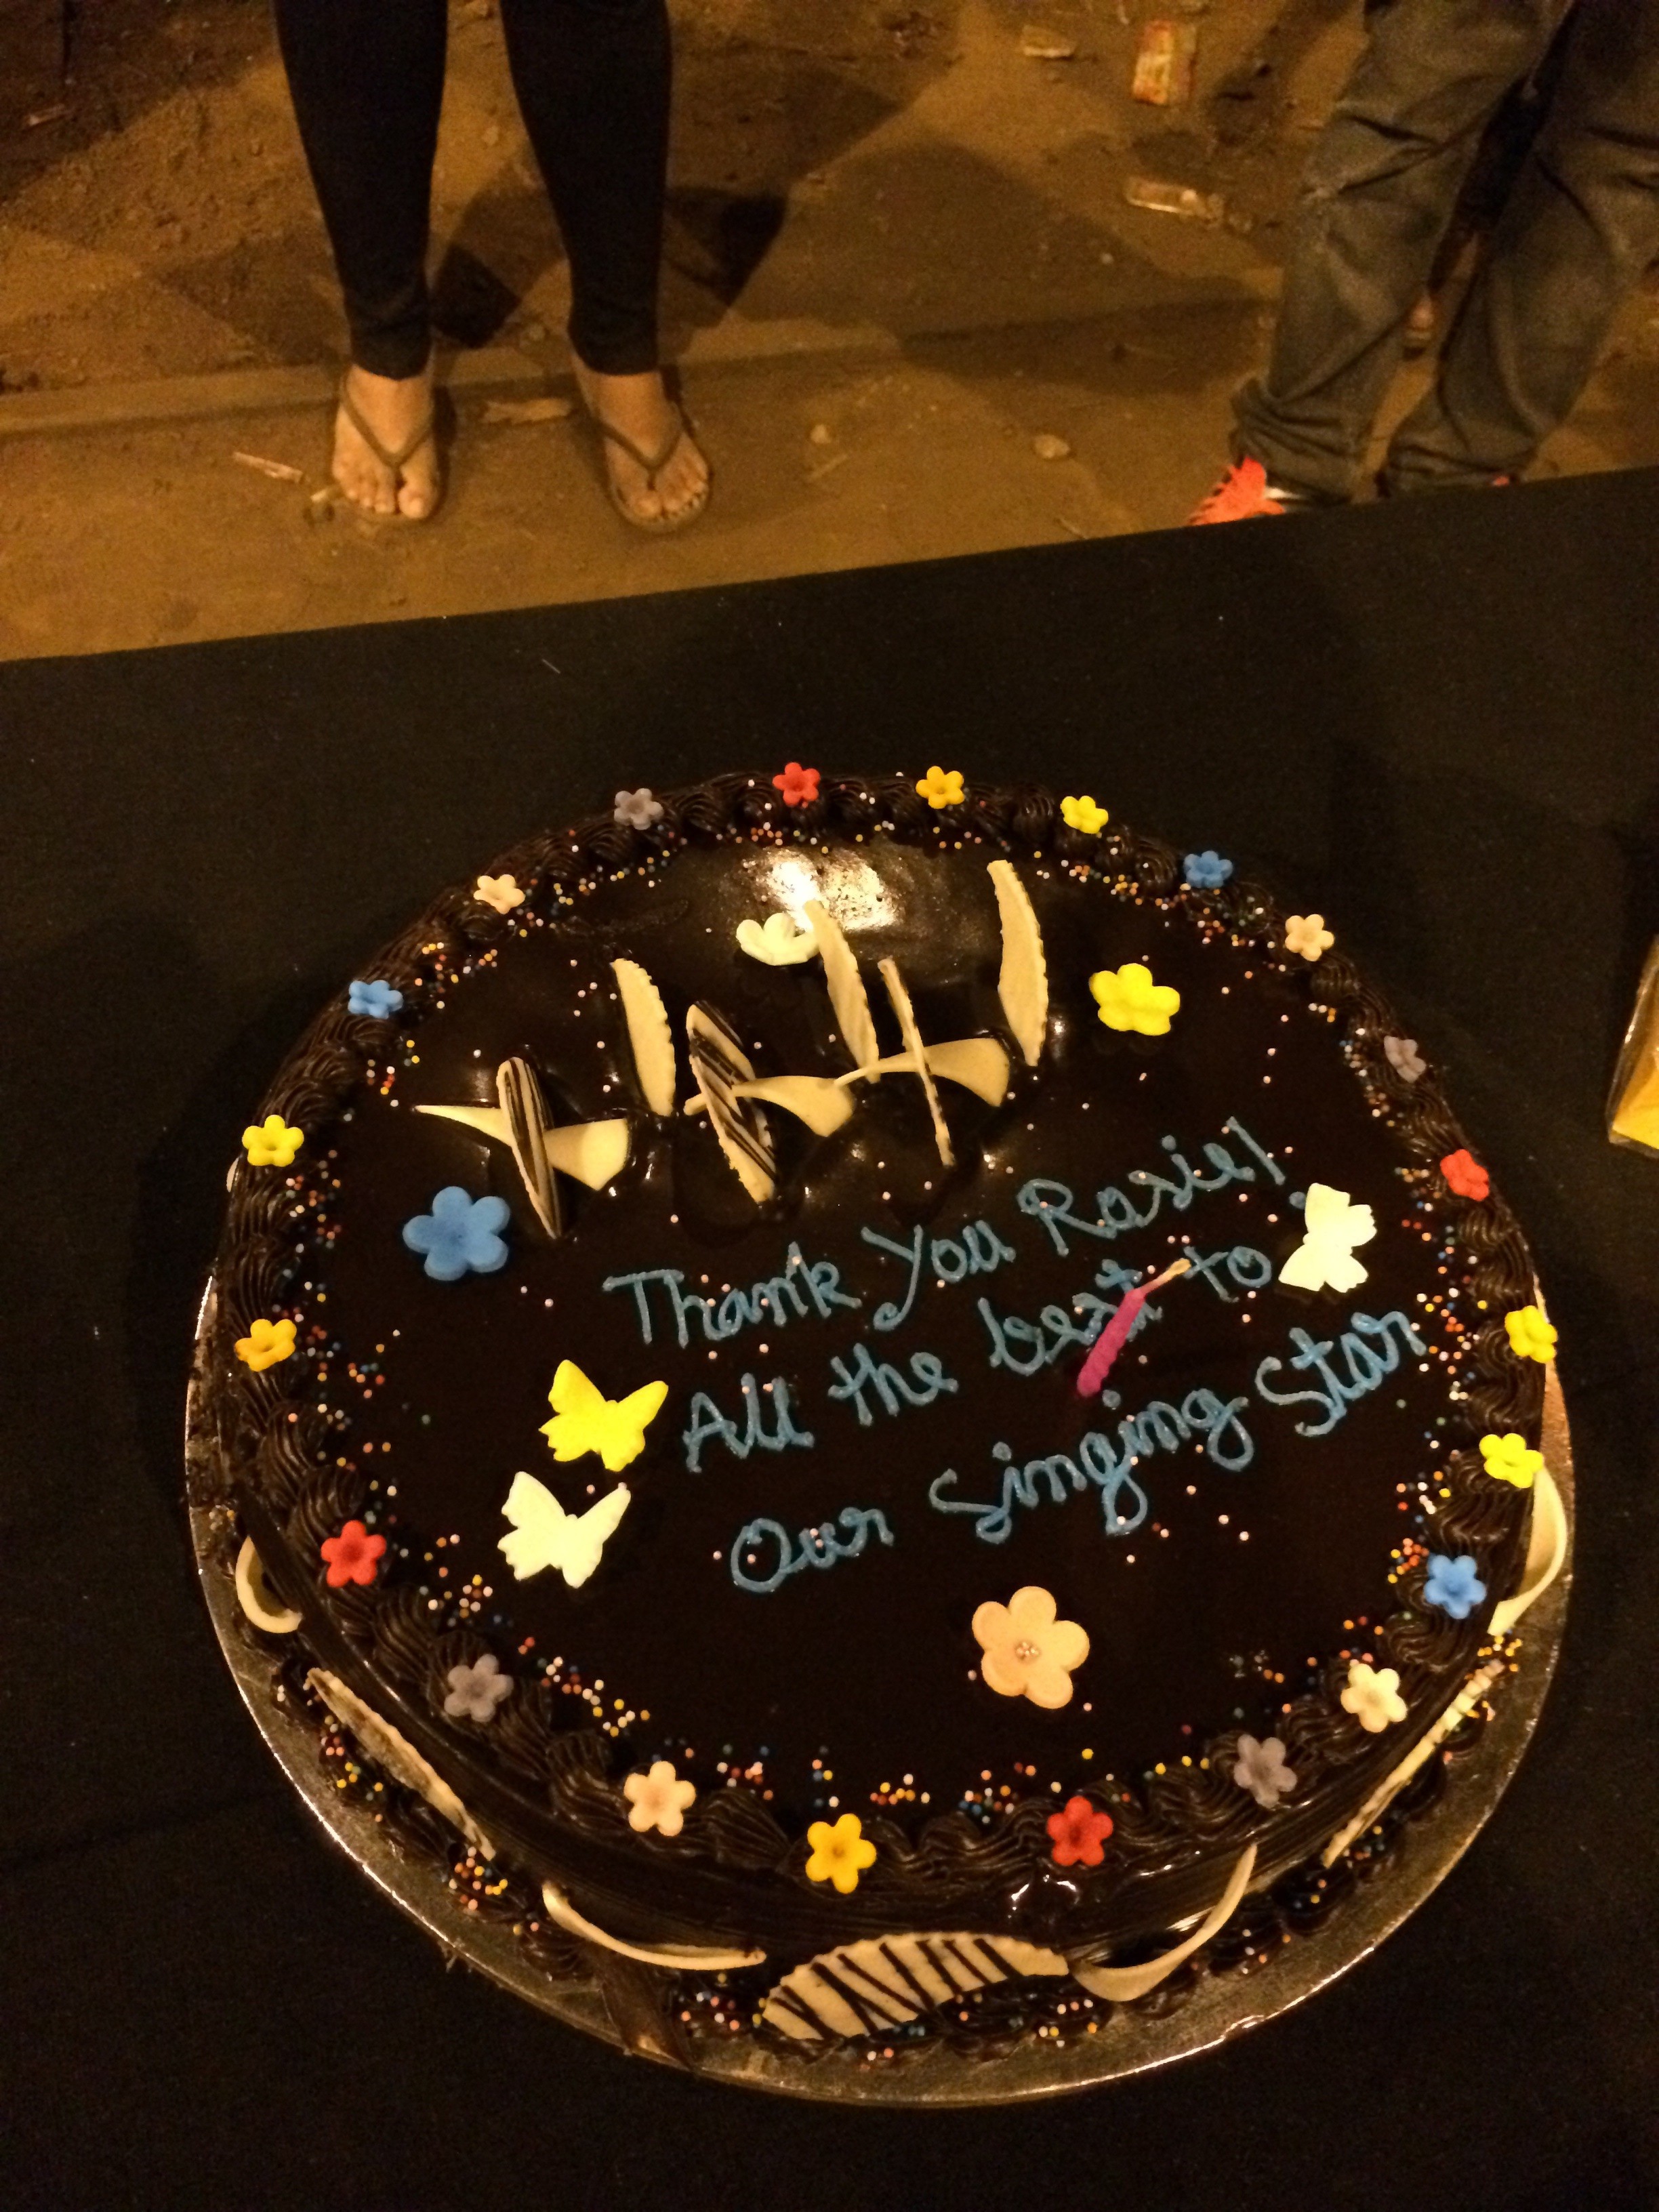 Image of the cake with the message